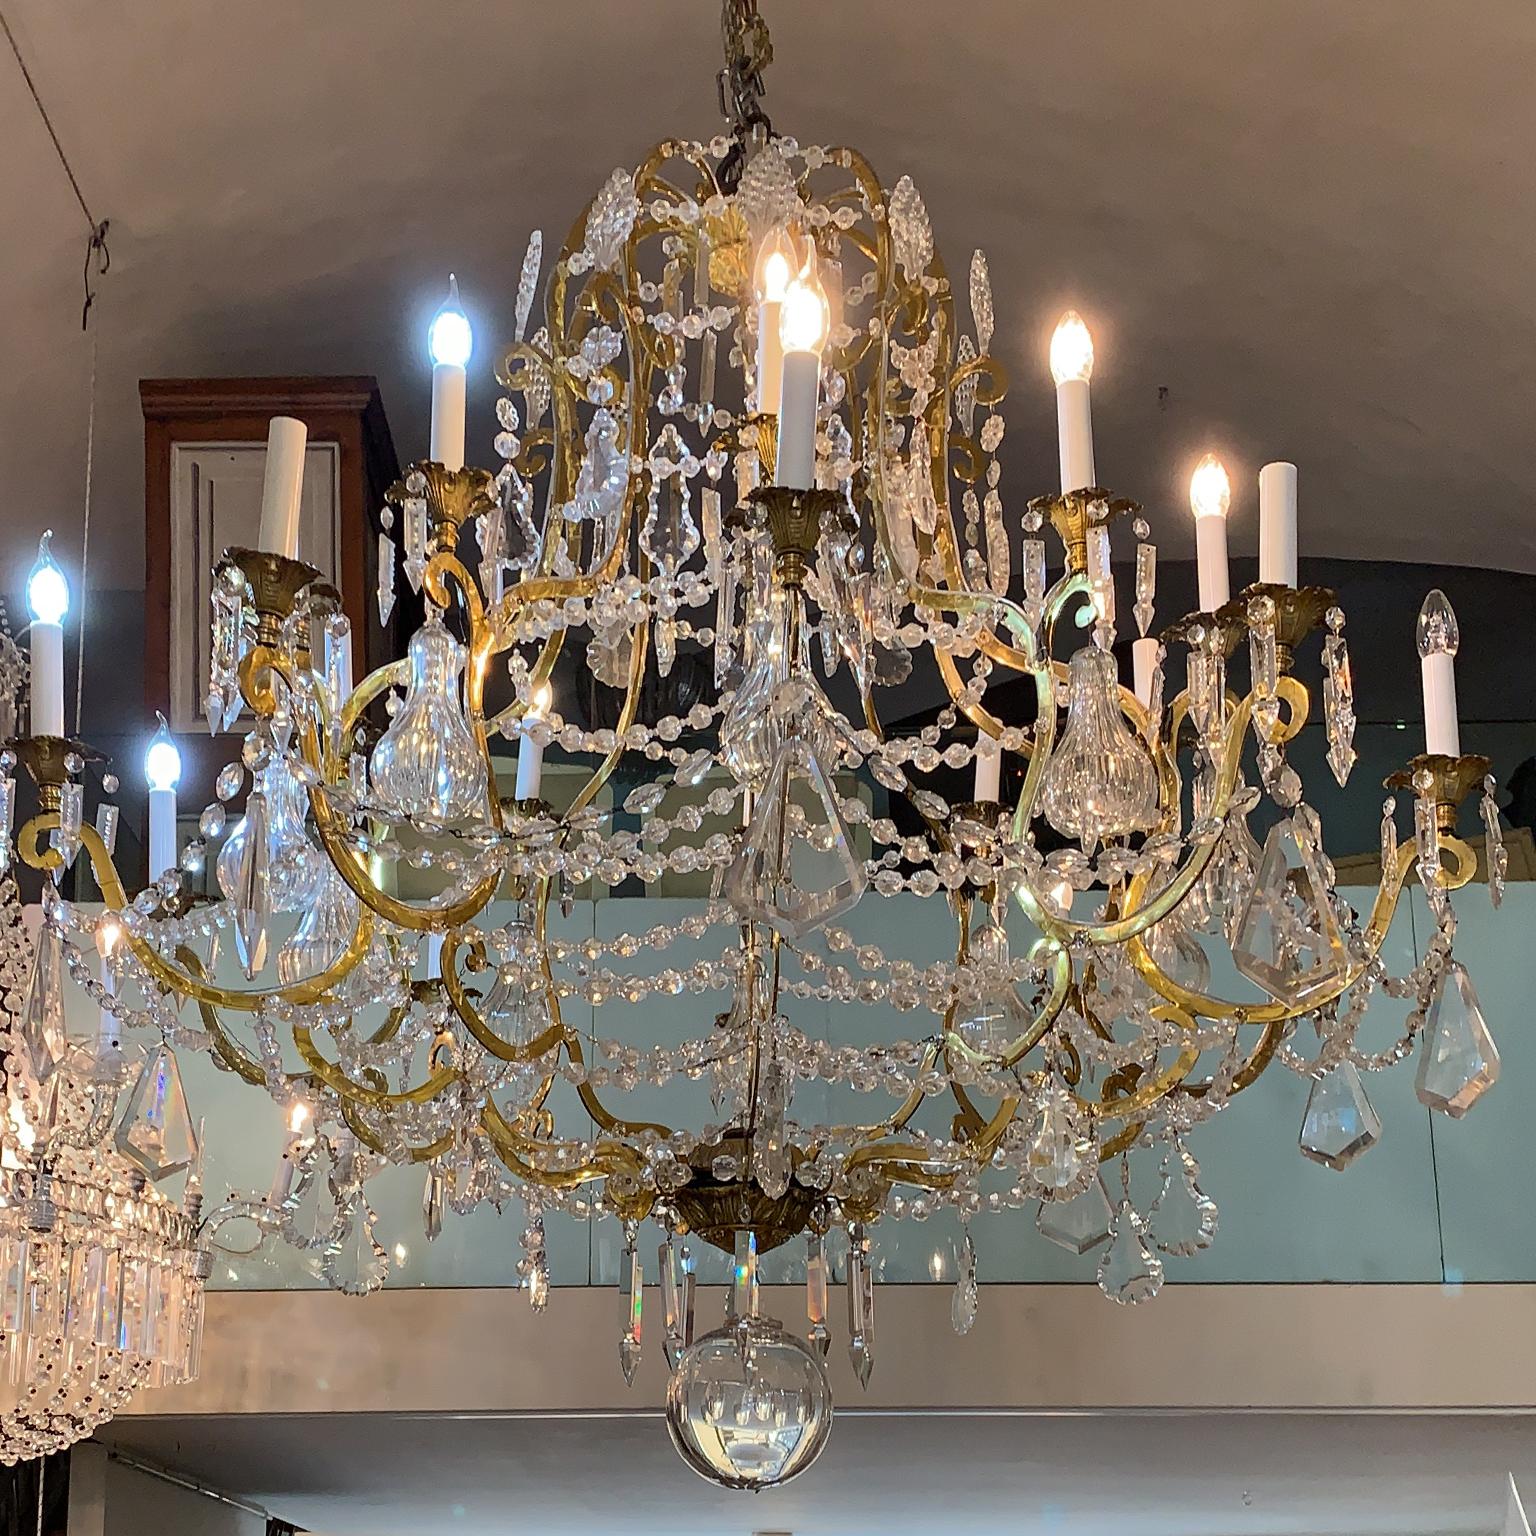 Very big chandelier in gilded bronze with glass cups and pendants, very bright, 20 lights, this chandelier is typical of the Italian manufacture of the mid-19th century. It is made up of 10 large arms in self-supporting gilded bronze. It has the